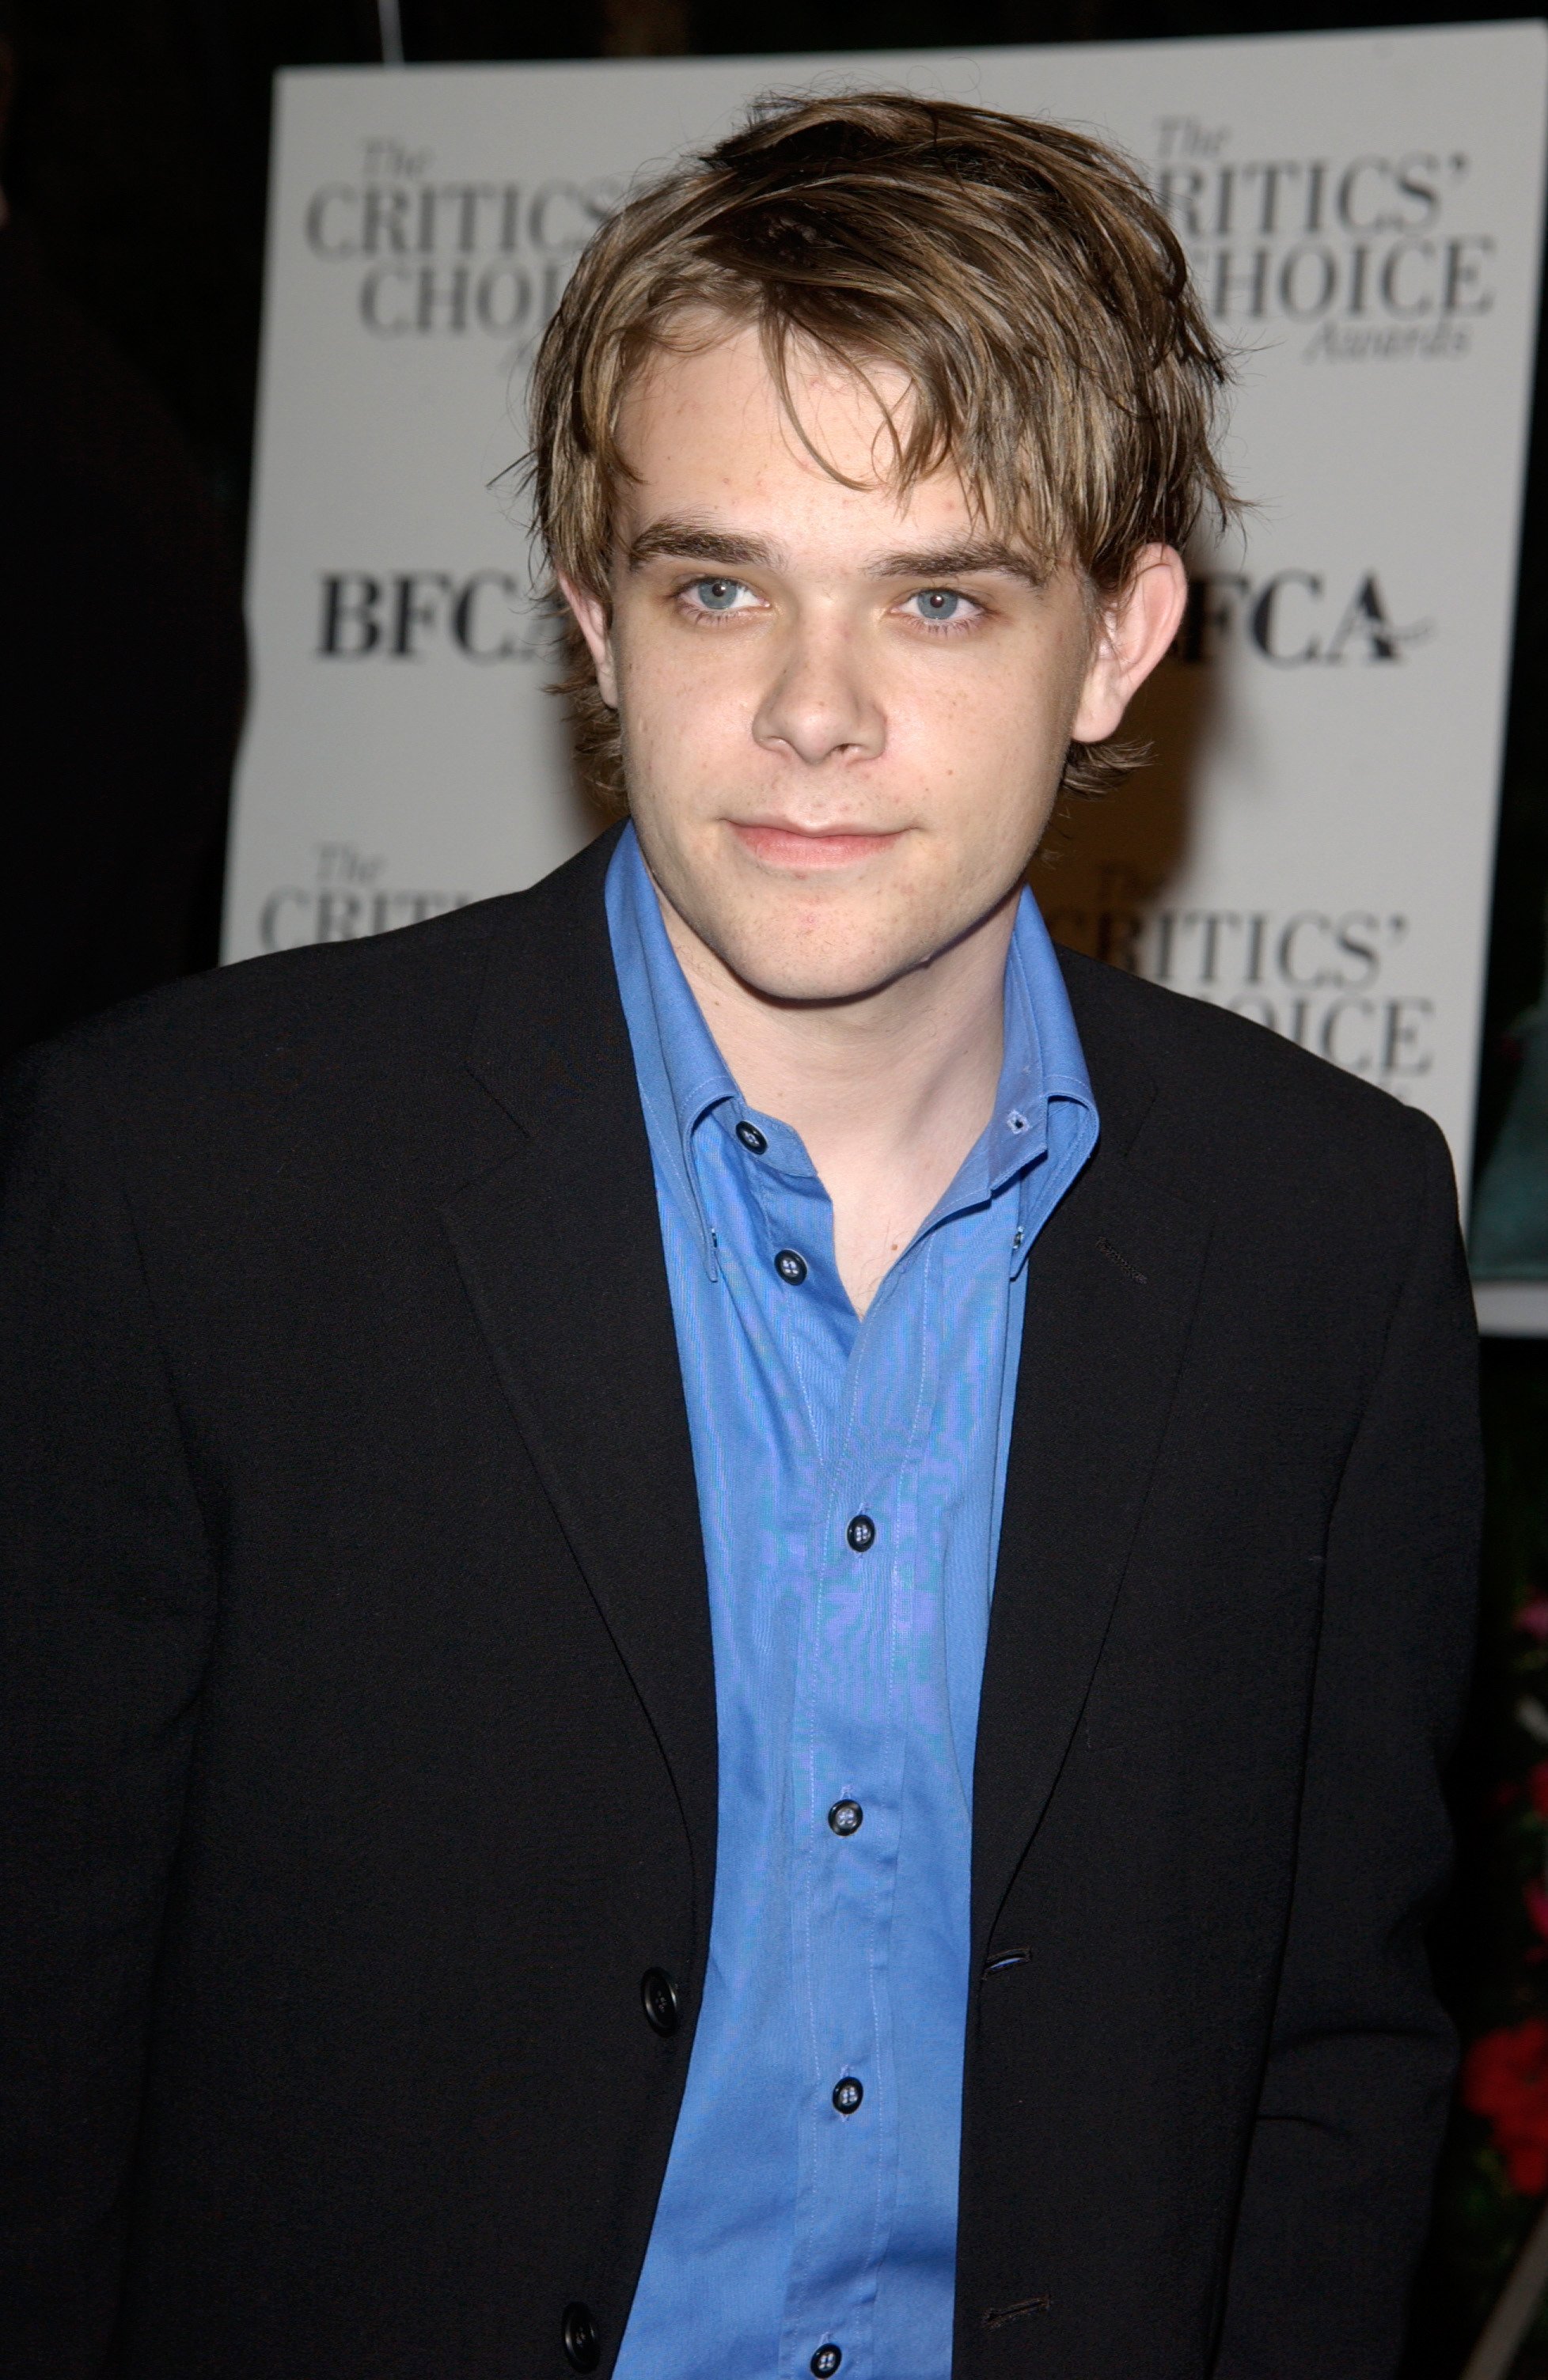 Nick Stahl at the 7th Annual Critics Choice Awards at the Beverly Hills Hotel on June 11, 2002 in California | Photo: Shutterstock